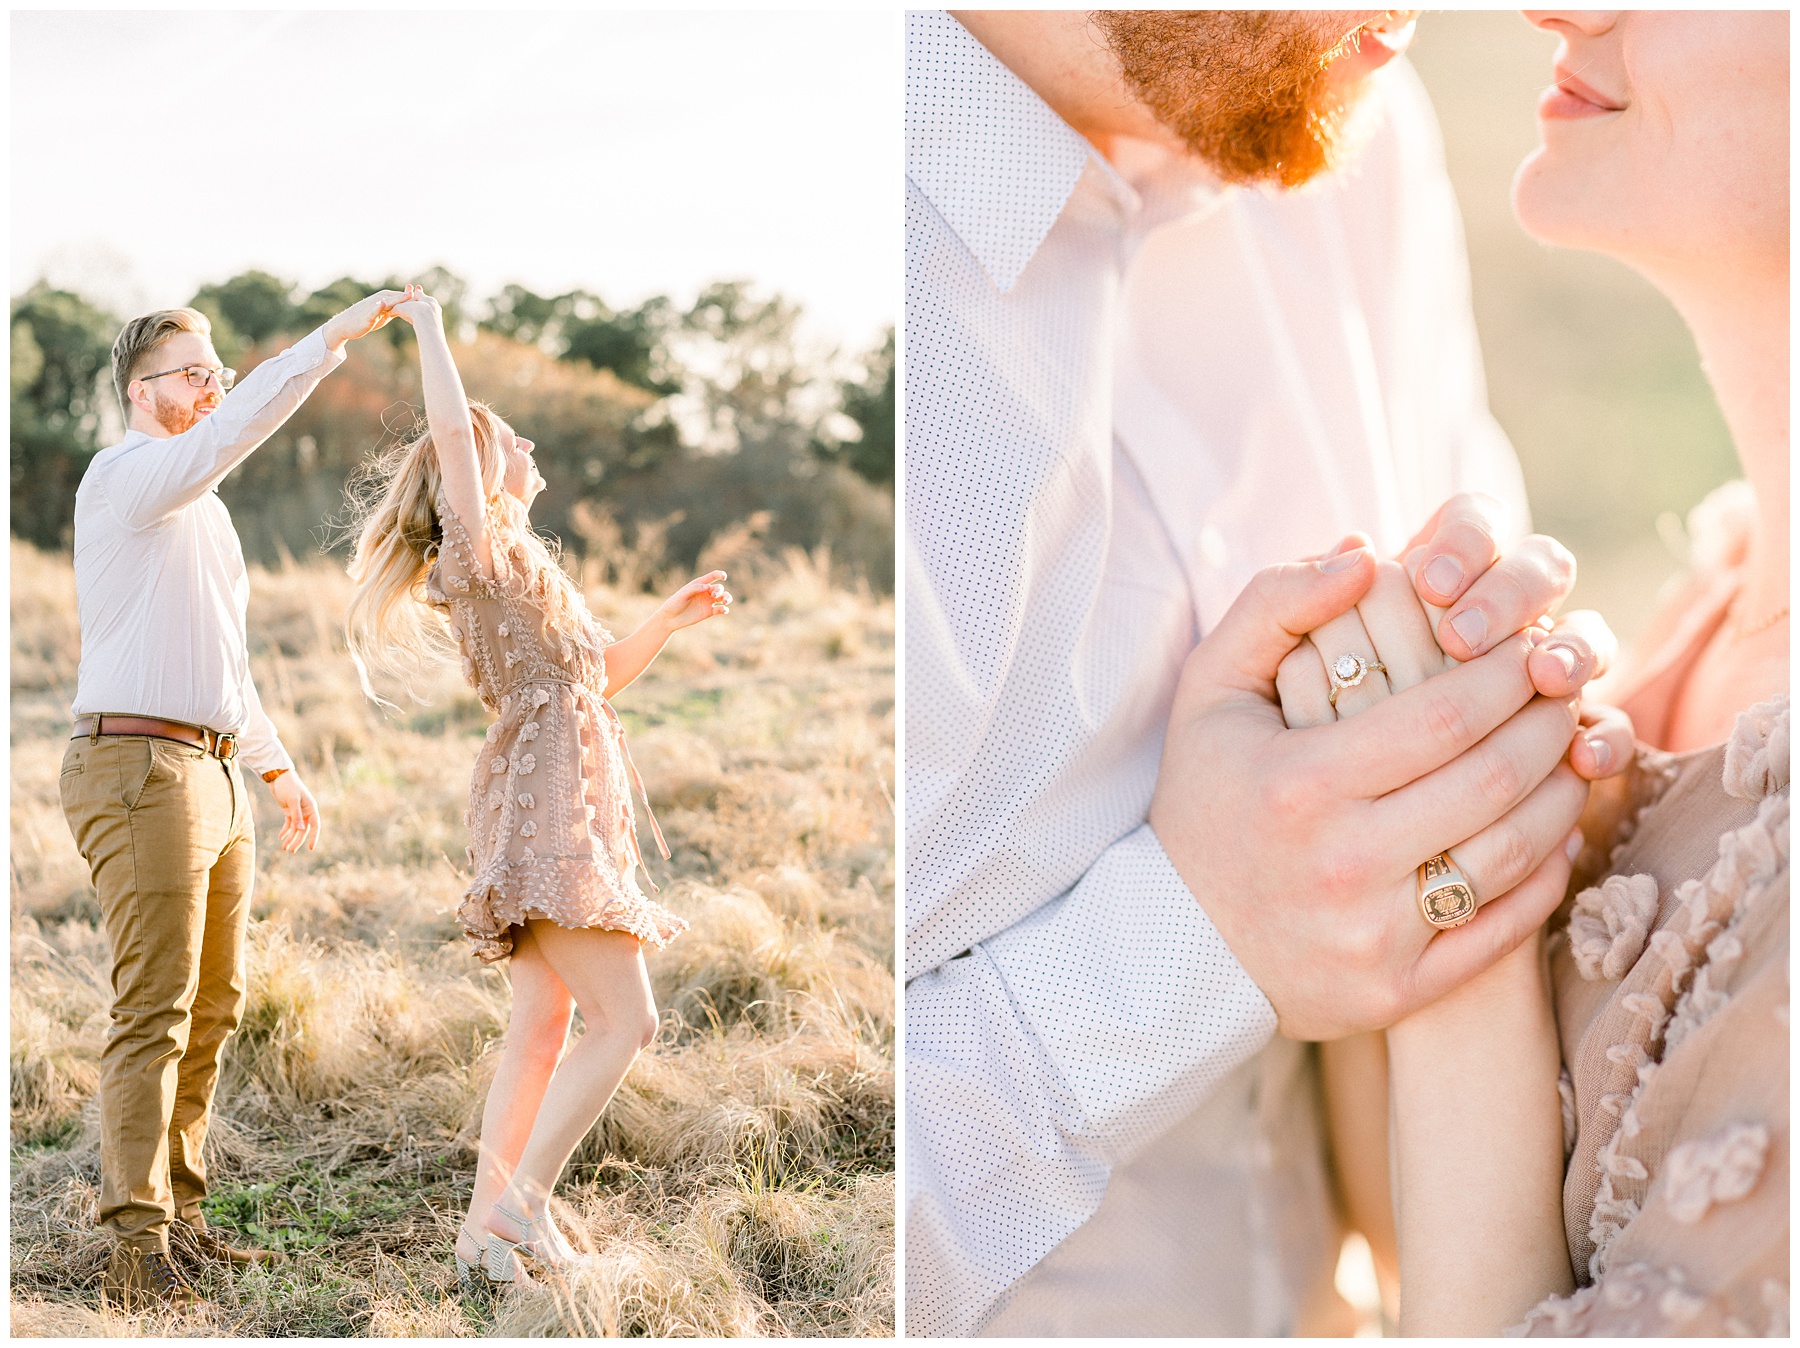 North Carolina Museum of Art Spring Engagement Session in Raleigh North Carolina. Twirling in Sun soaked fields at sunset